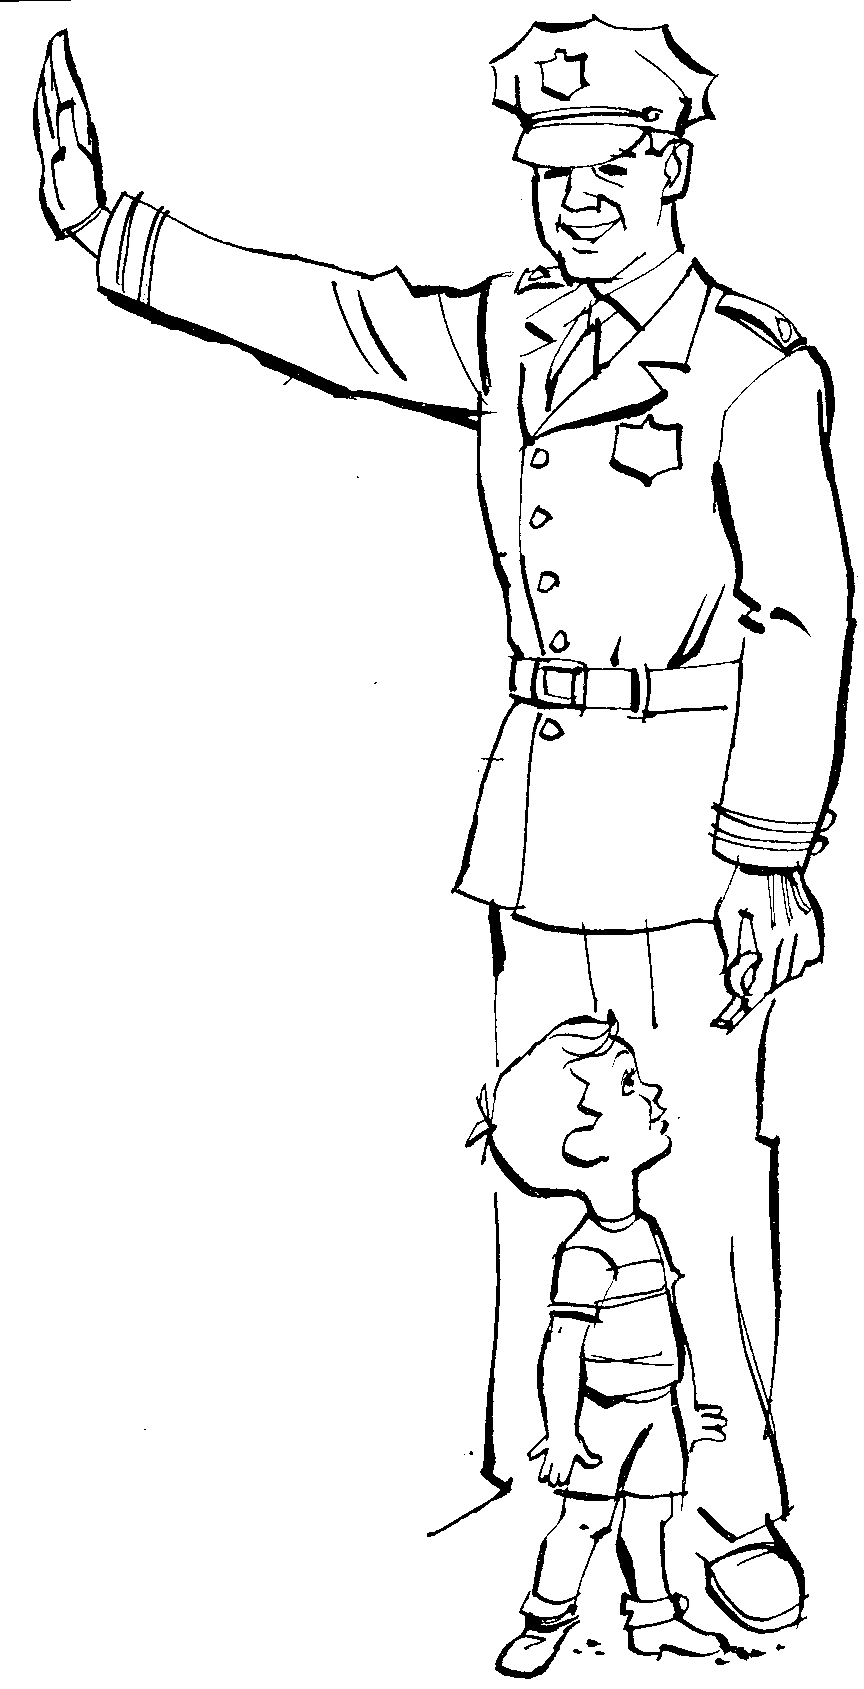 Policeman and boy Drawing free image download